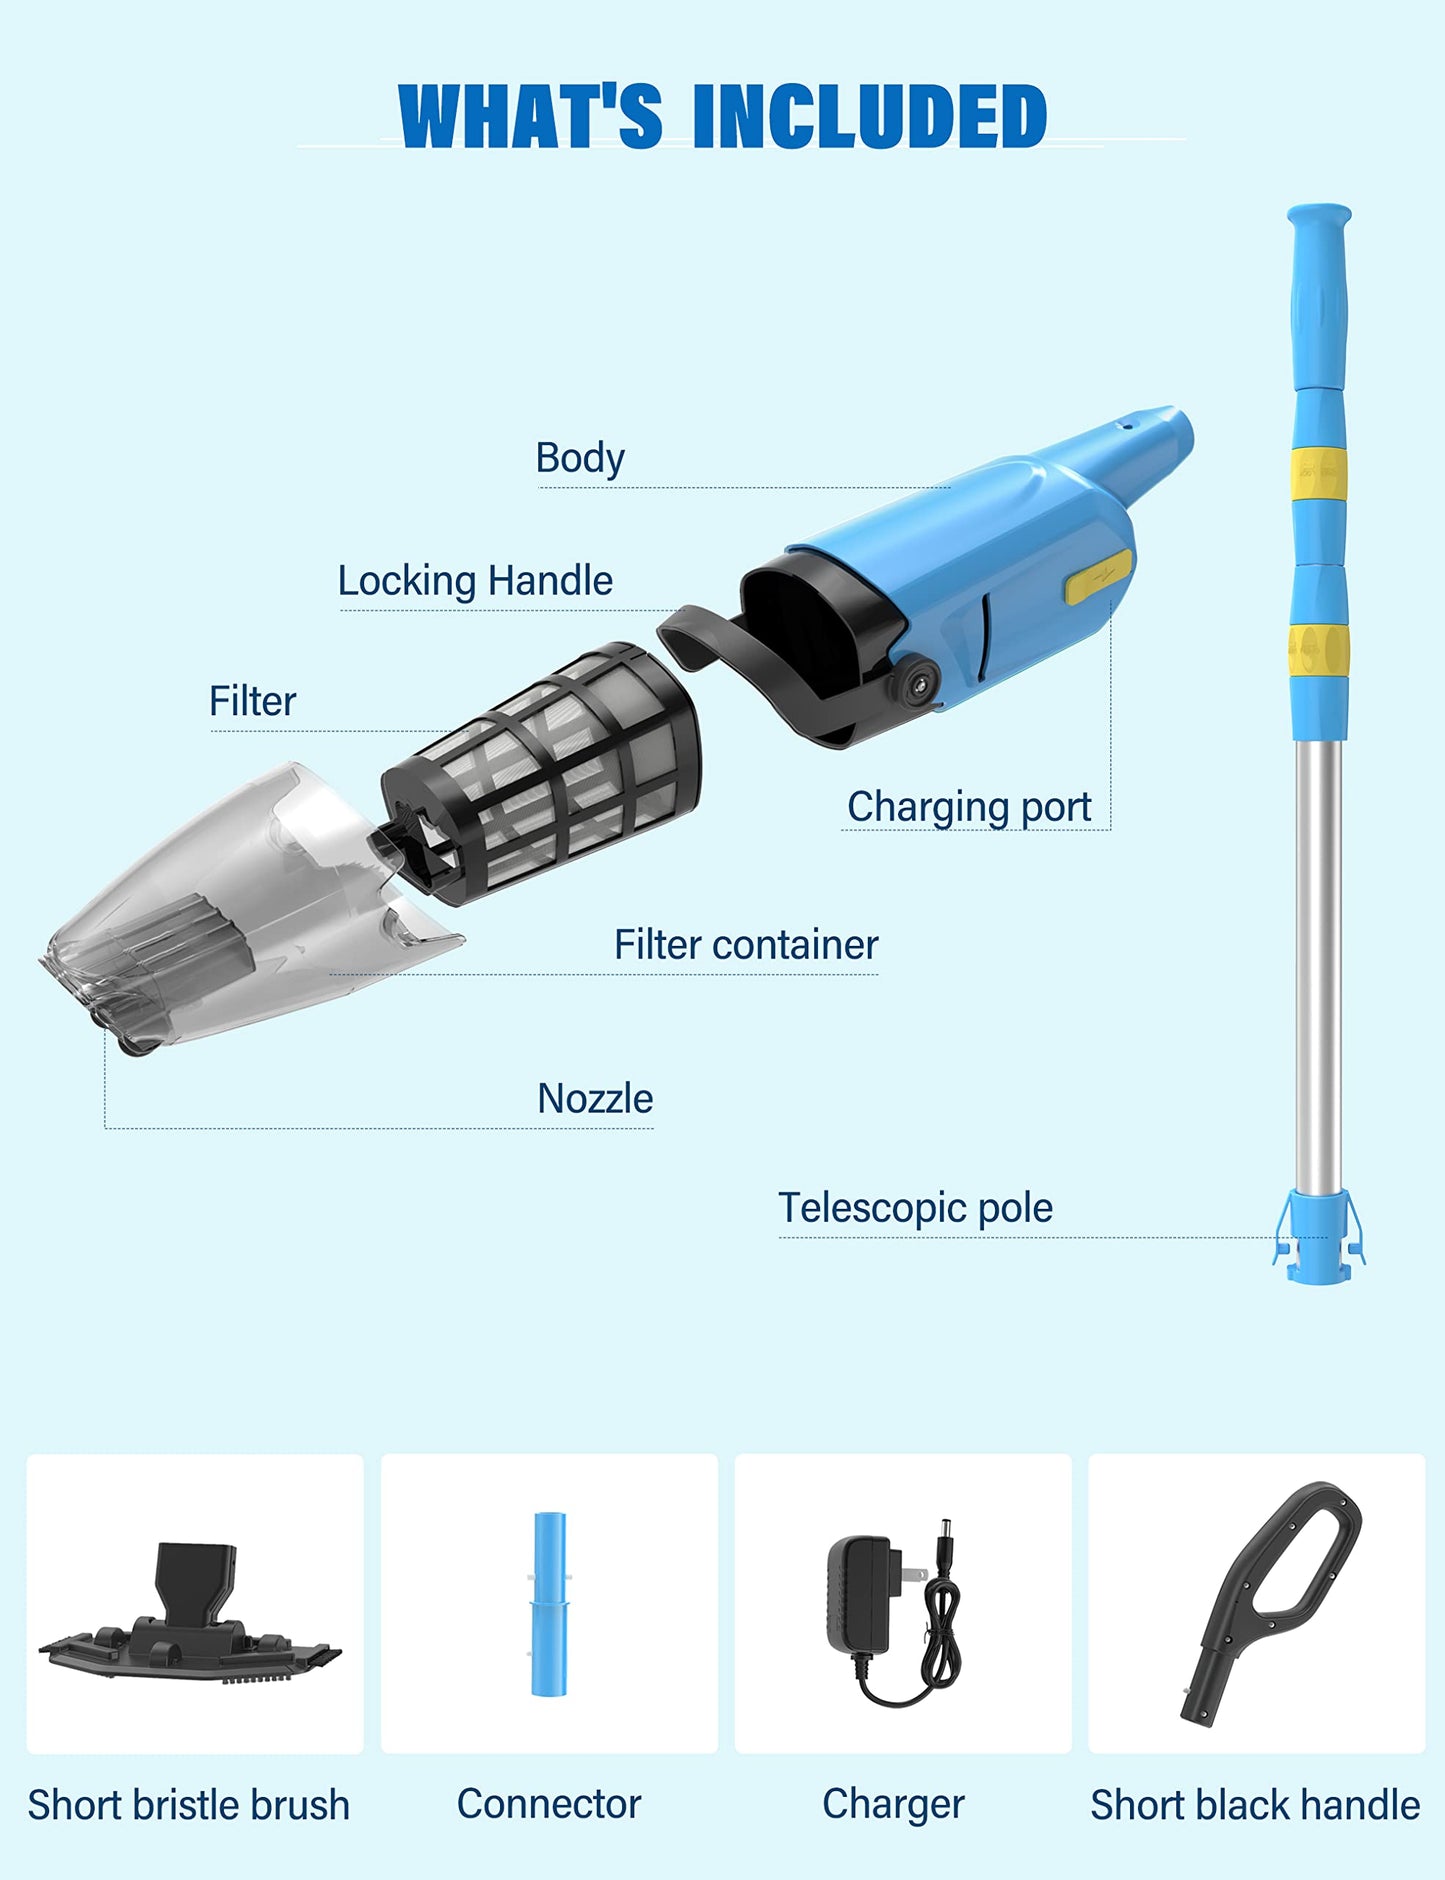 Efurden Handheld Pool Vacuum, Rechargeable Pool Cleaner with Running Time up to 60-Minutes Ideal for Above Ground Pools, Spas and Hot Tub for Sand and Debris, Blue